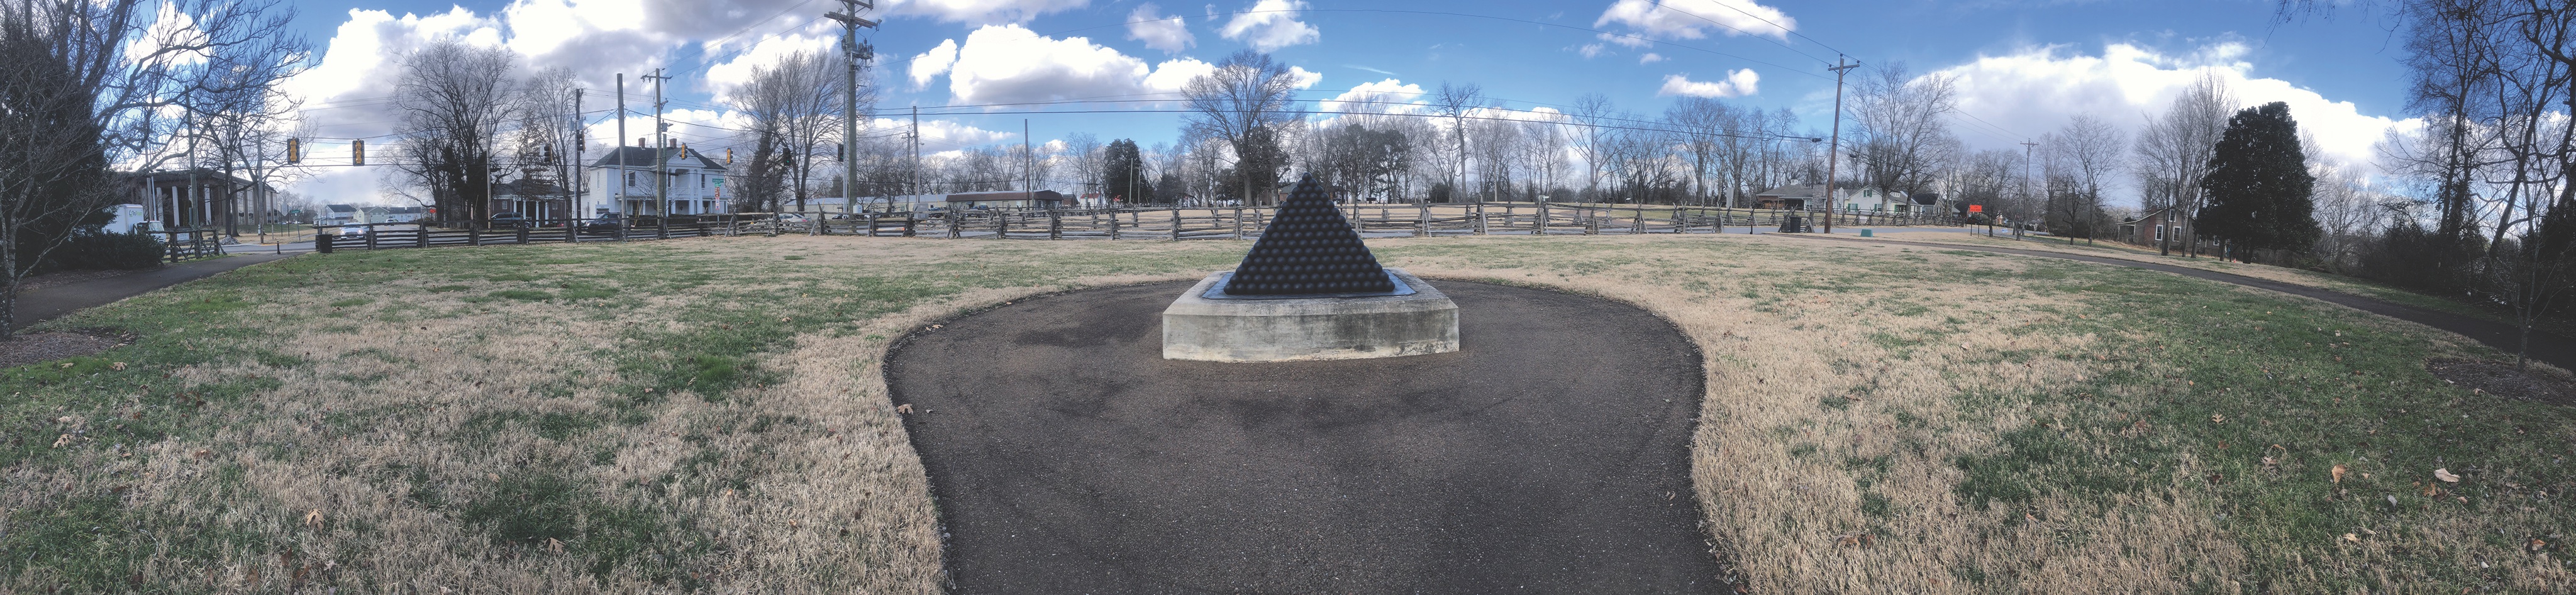 A cannonball pyramid marks the general location of Cleburne’s death at the Battle of Franklin. (John Banks)